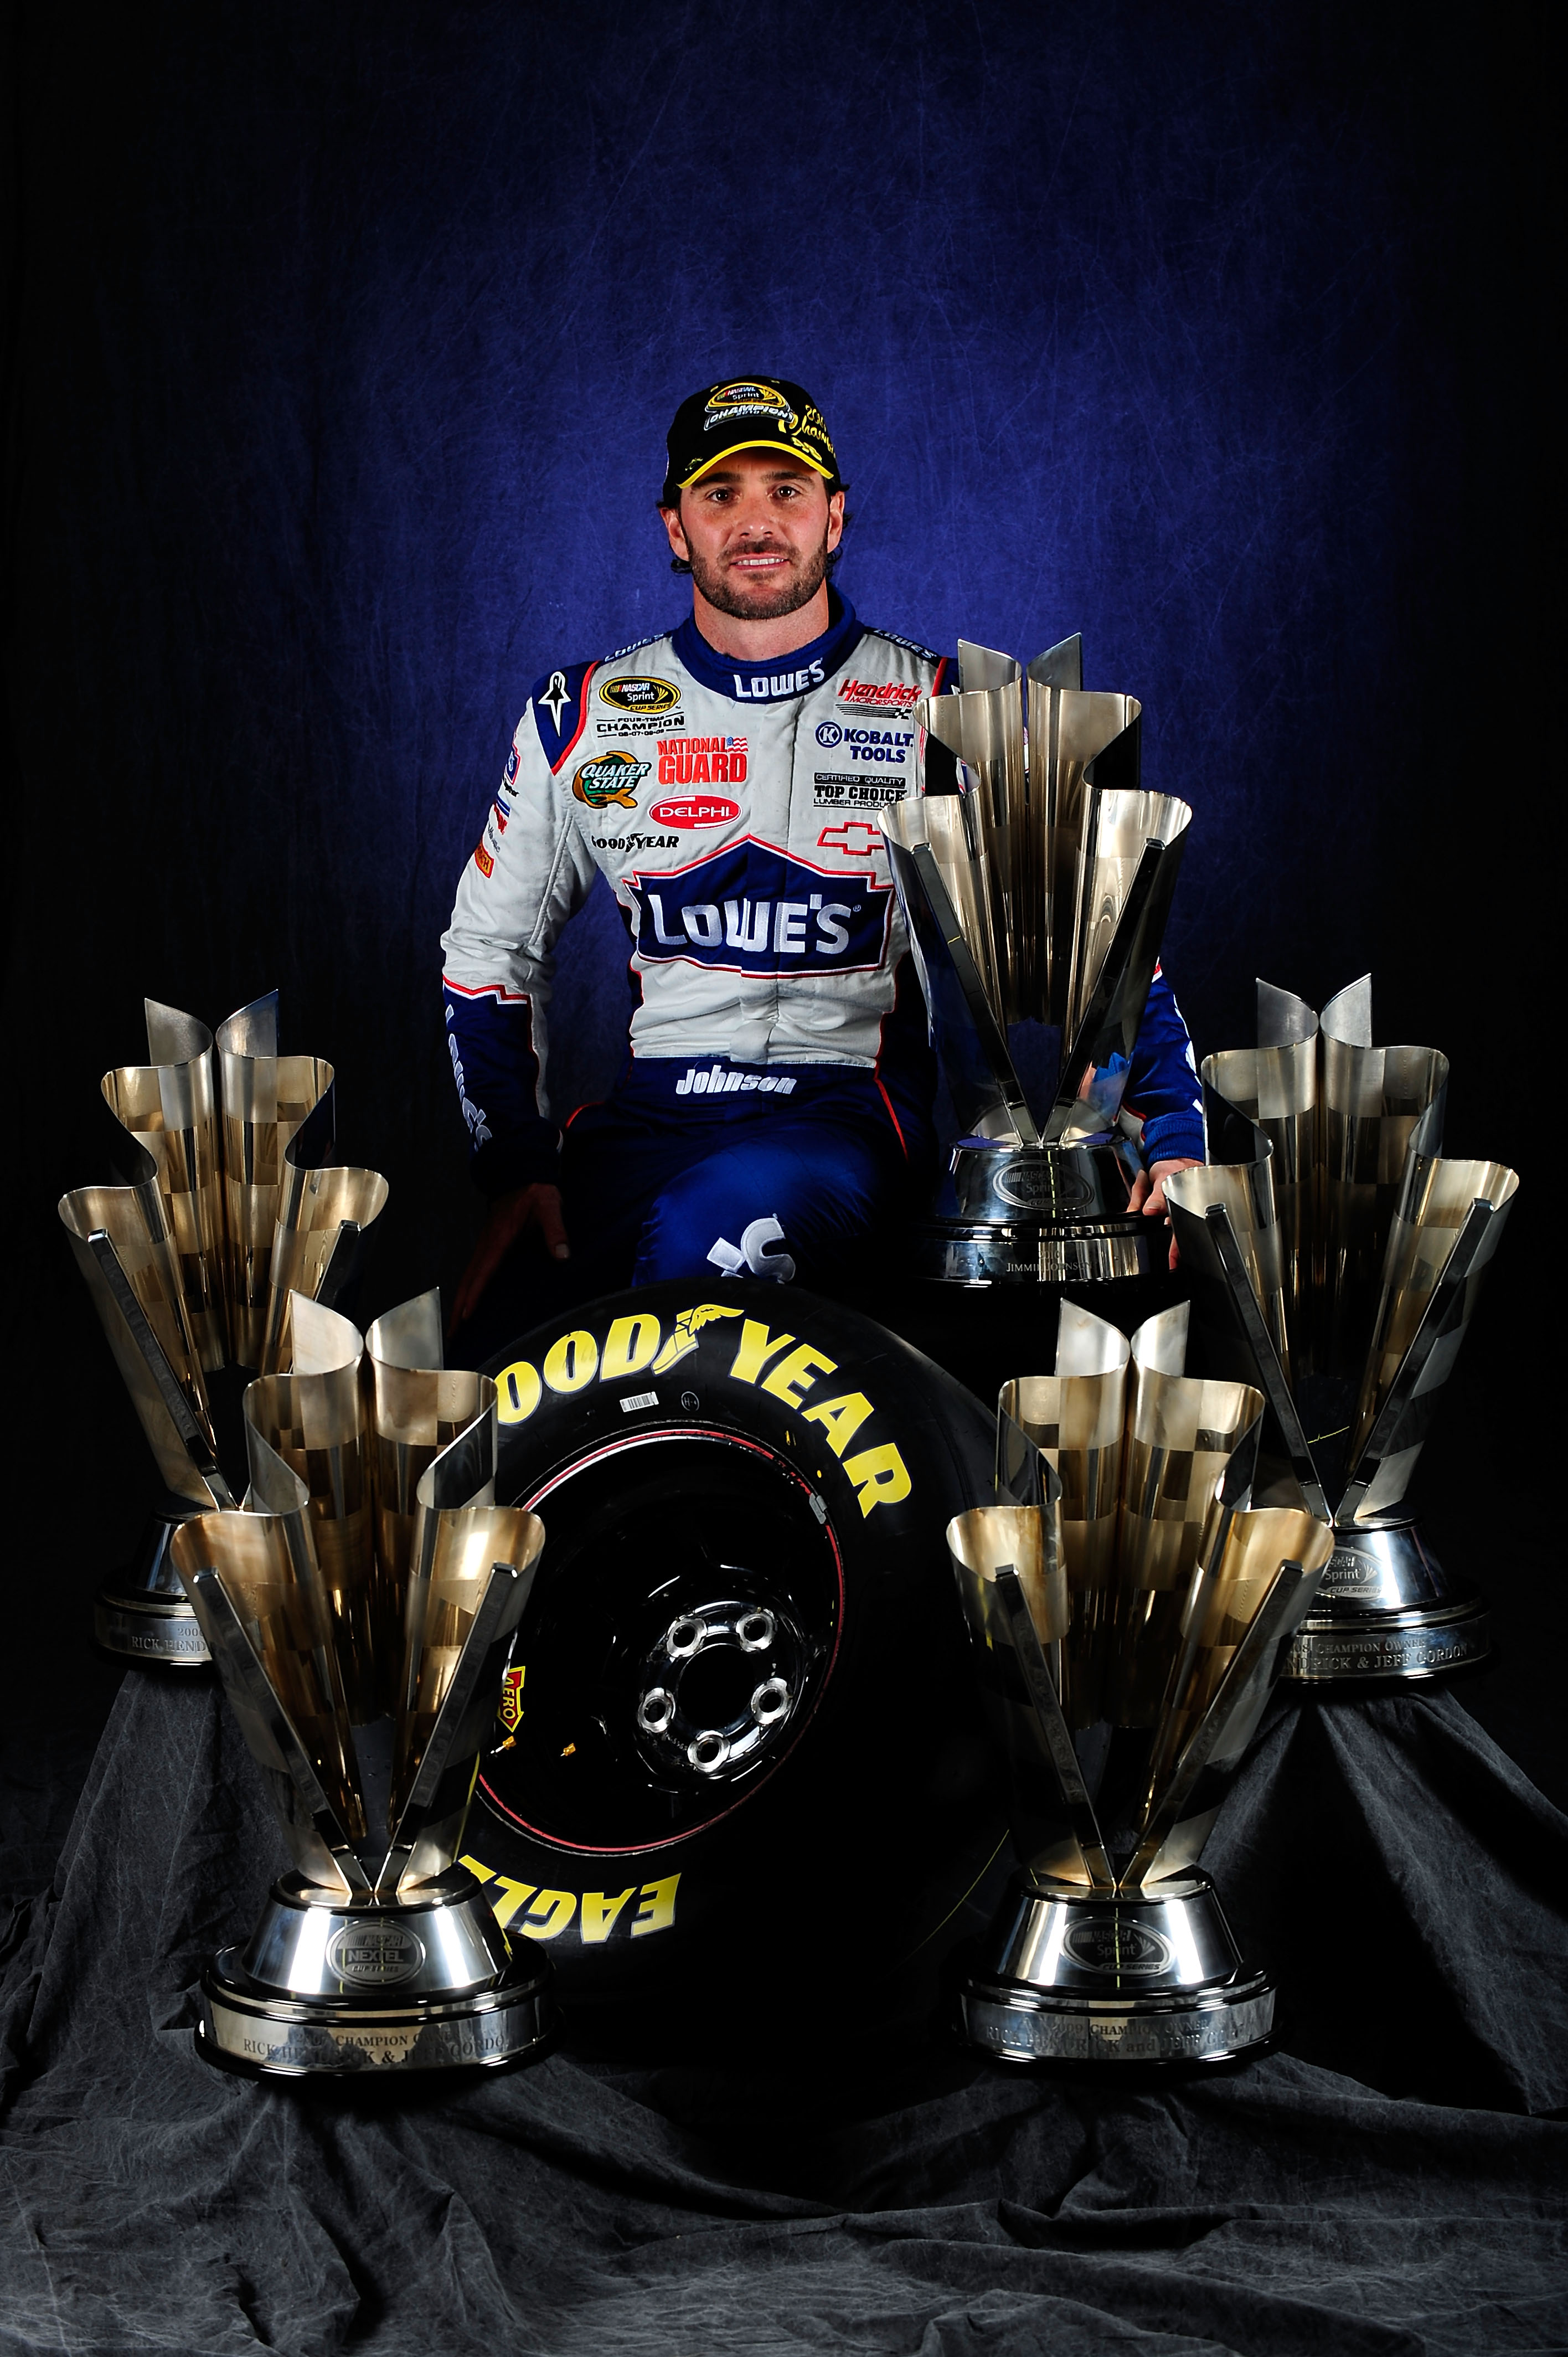 HOMESTEAD, FL - NOVEMBER 21:  NASCAR Champion Jimmie Johnson, driver of the #48 Lowe's Chevrolet, poses with the Sprint Cup Series Championship trophies at Homestead-Miami Speedway on November 21, 2010 in Homestead, Florida. Johnson clinched his fifth str